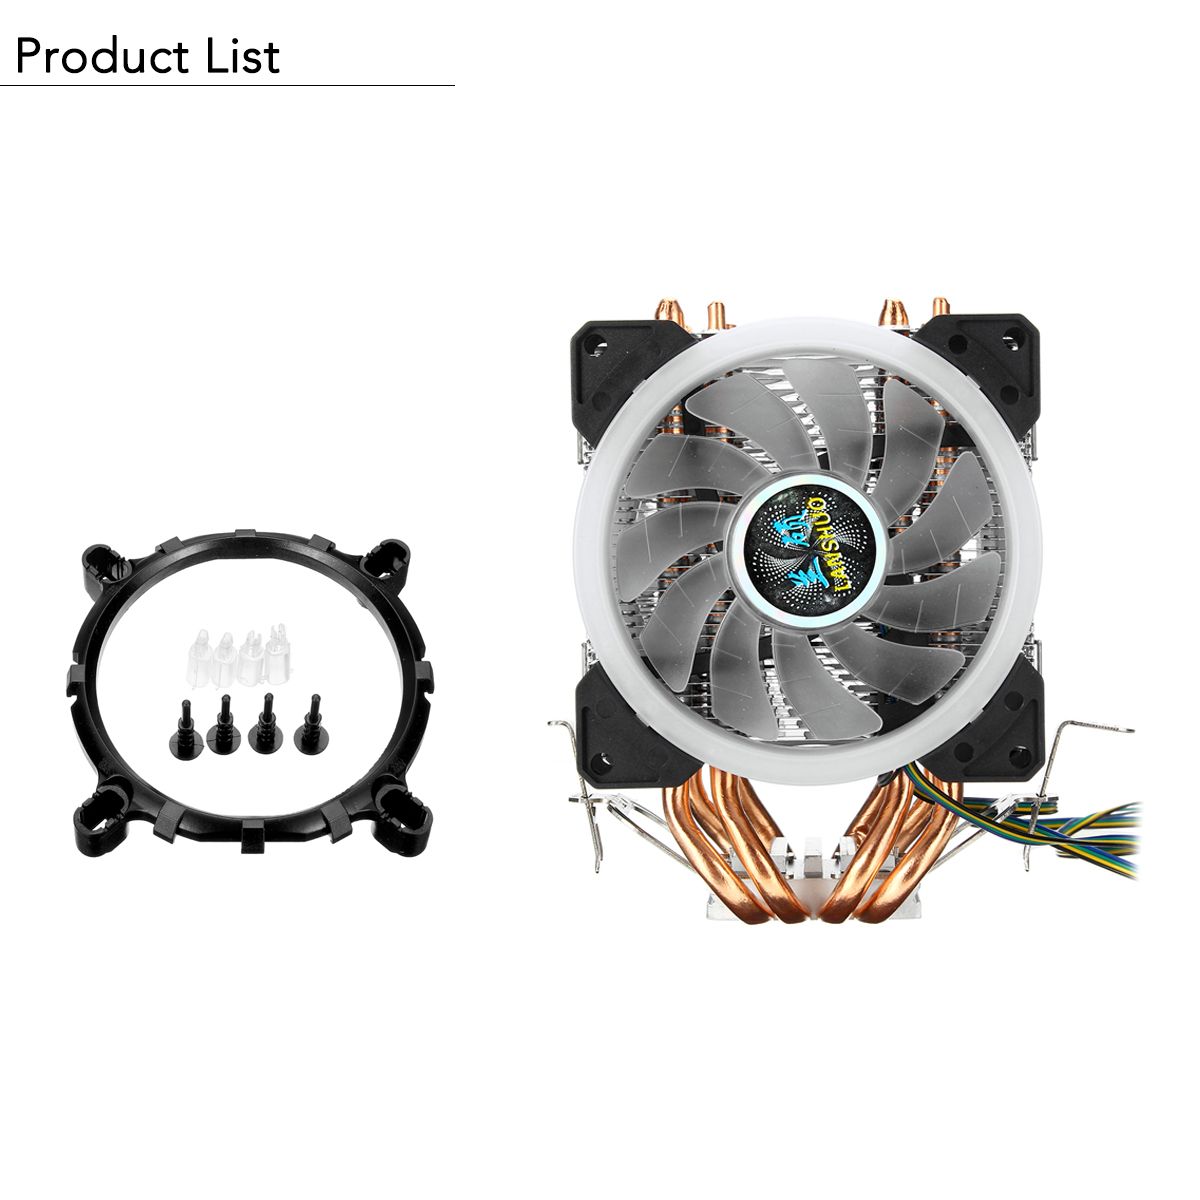 4Pin-Three-Fans-4-Heatpipes-Colorful-Backlit-CPU-Cooling-Fan-Cooler-Heatsink-For-Intel-AMD-1474547